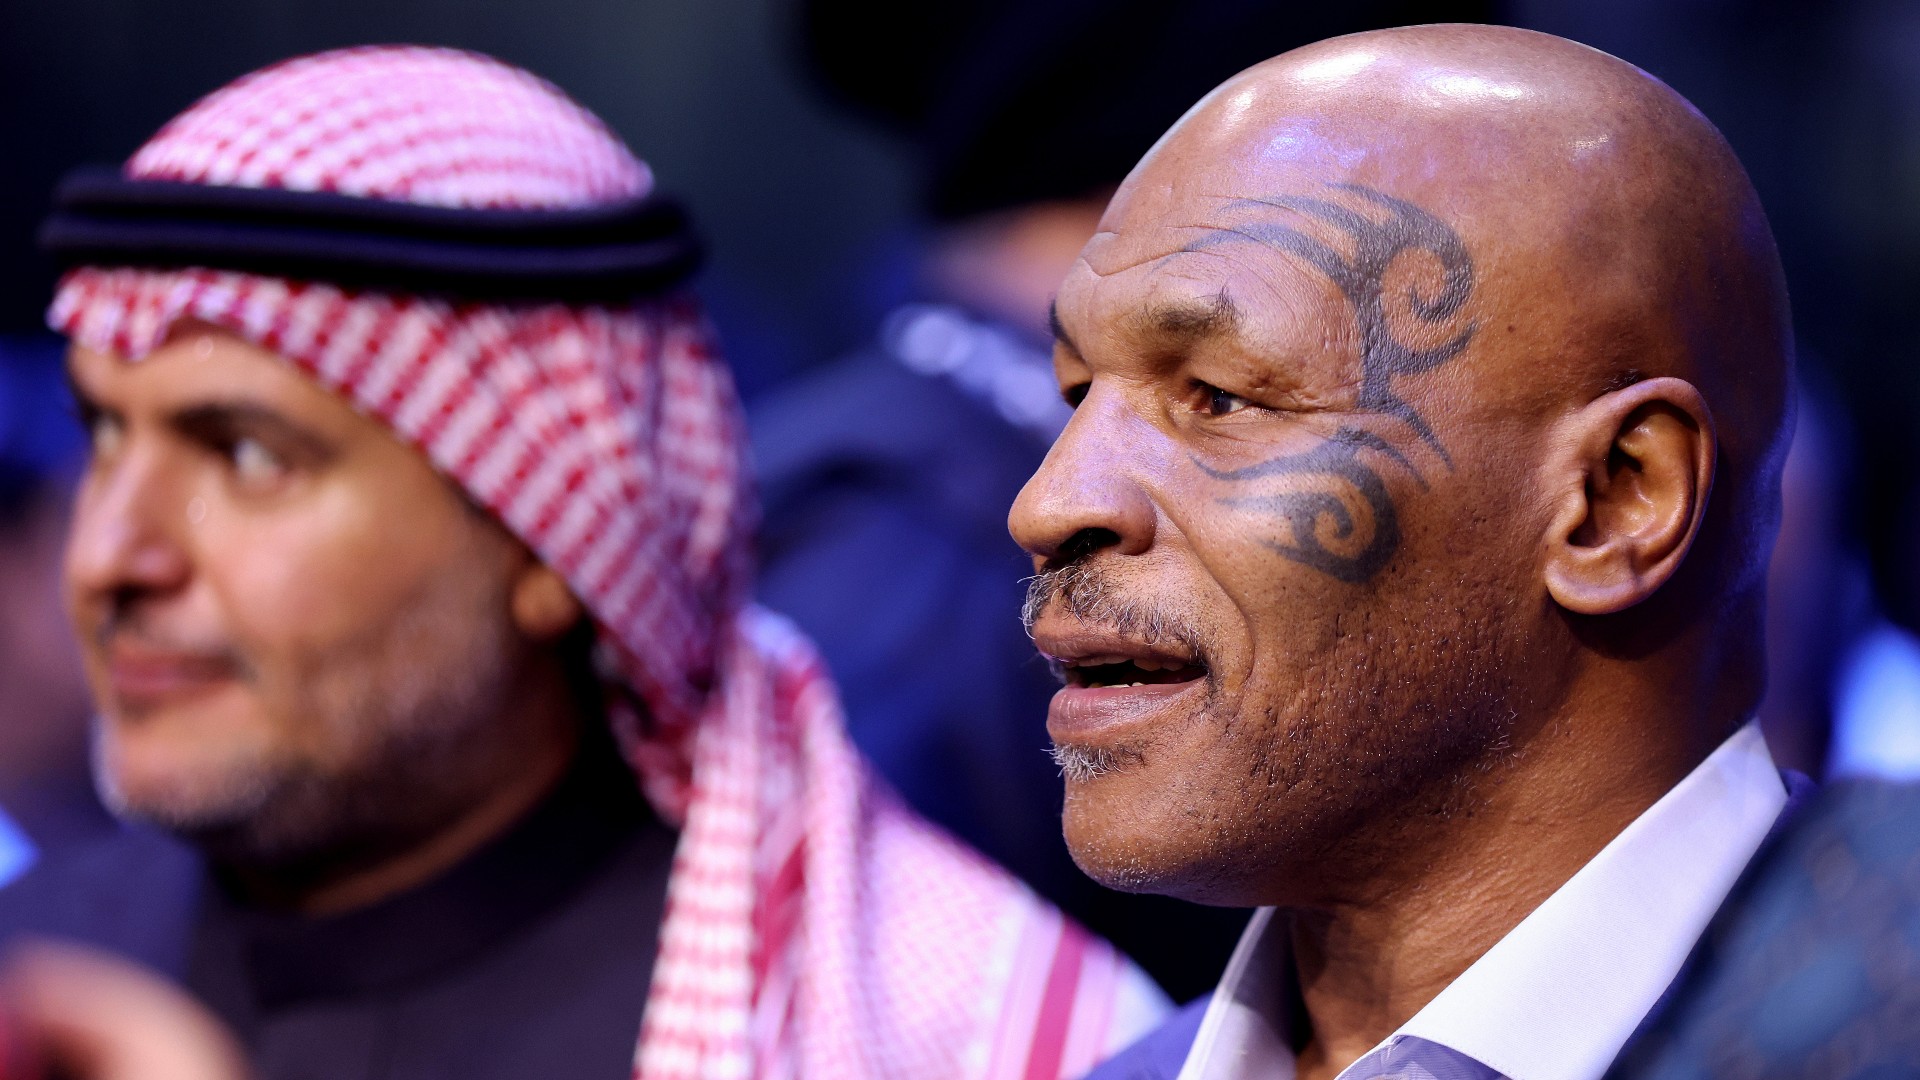 mike tyson meets ufc legend at pfl vs. bellator event ahead of title fights